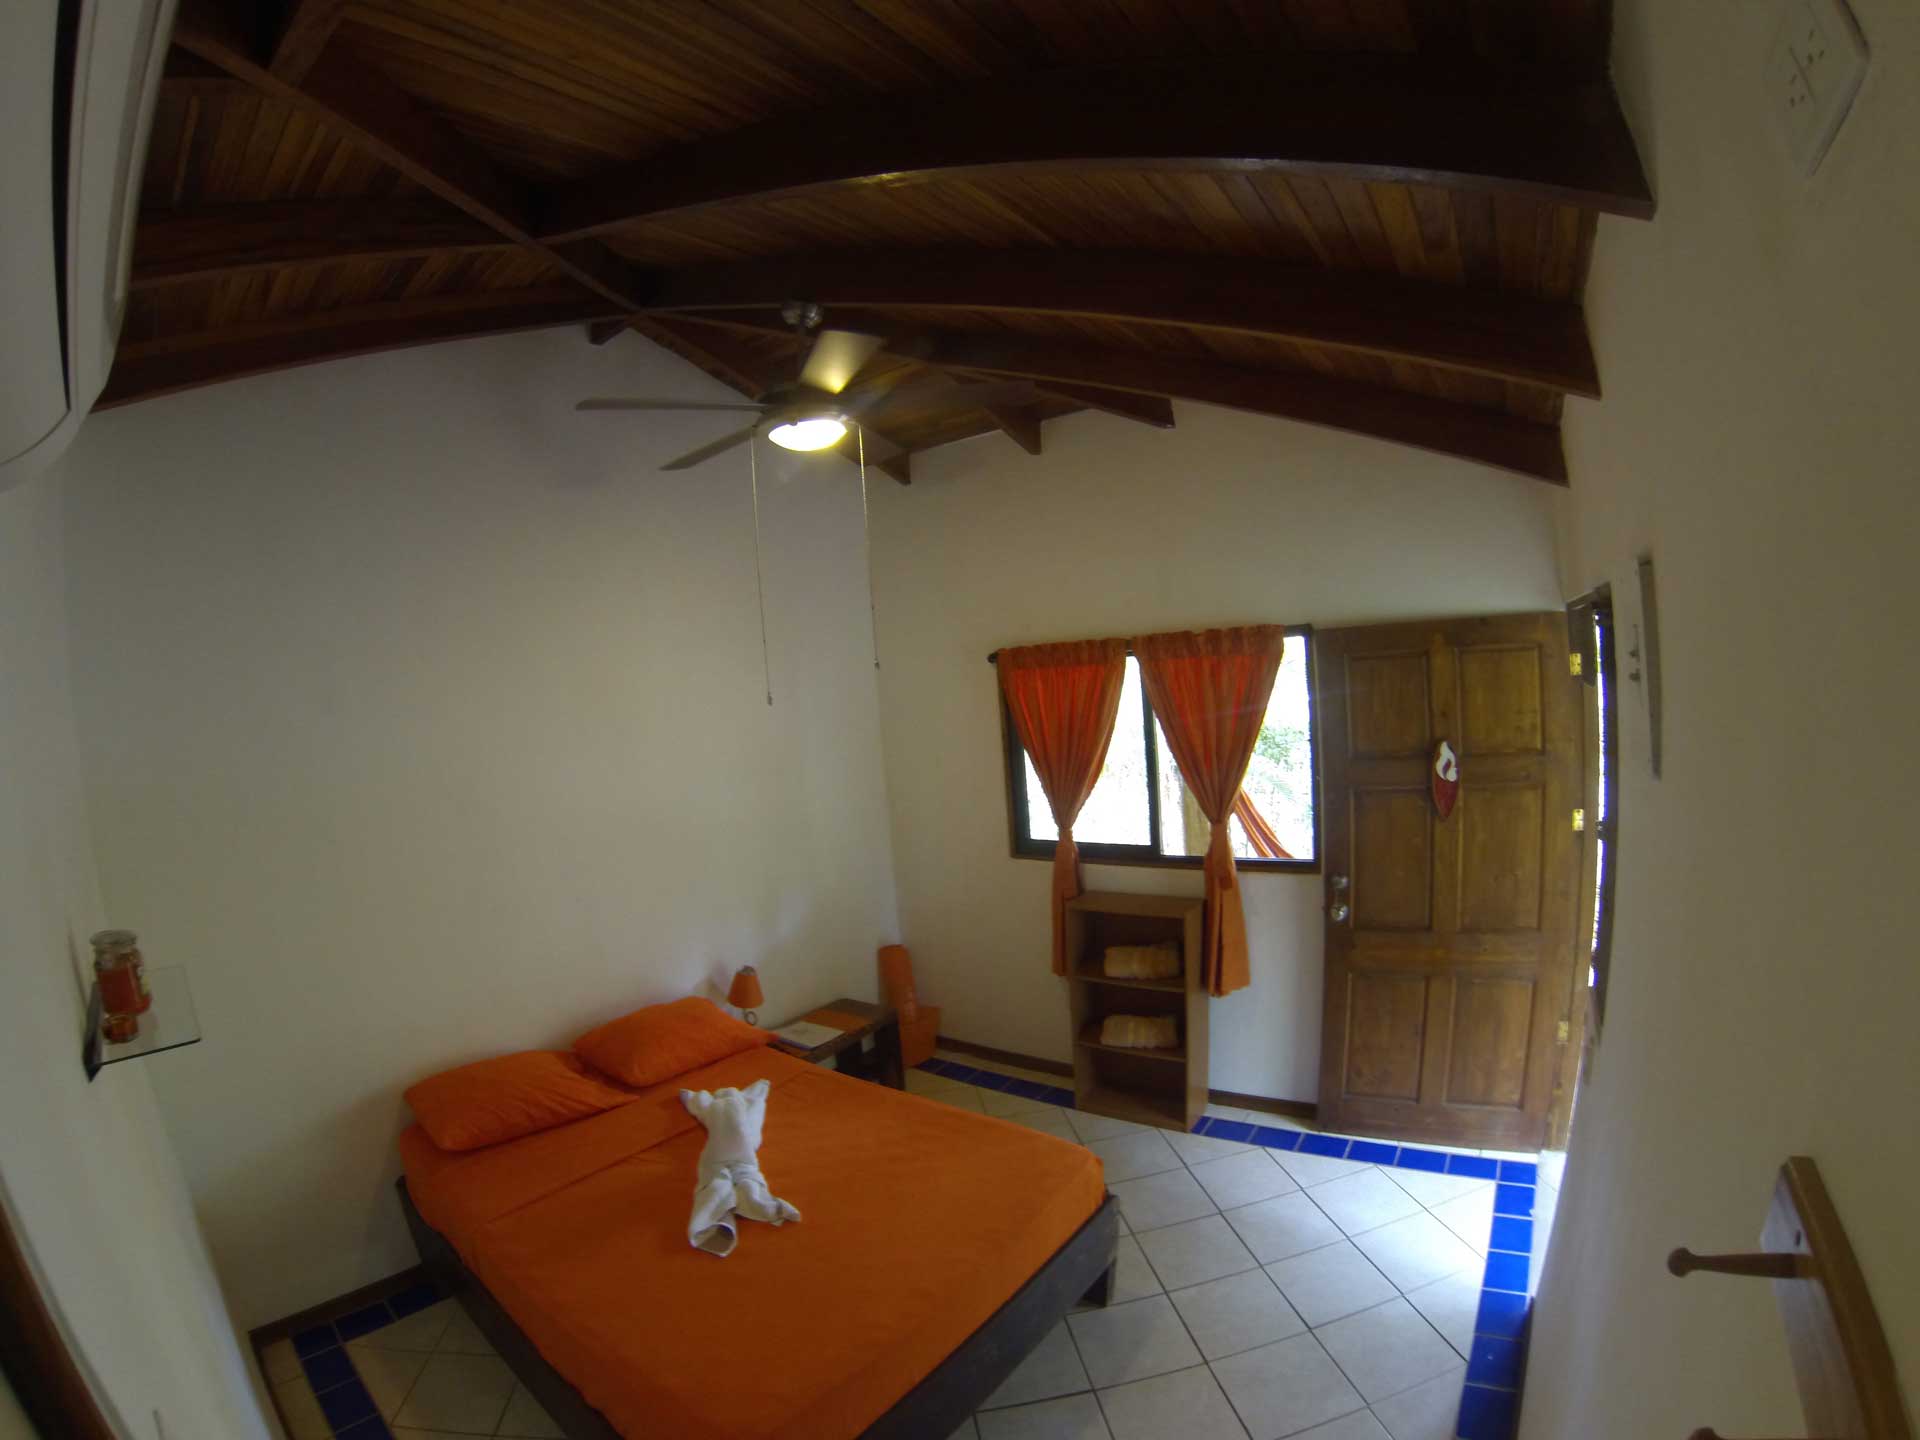 Fisheye view of bed, window, door, and ceiling in double room at Indra Inn